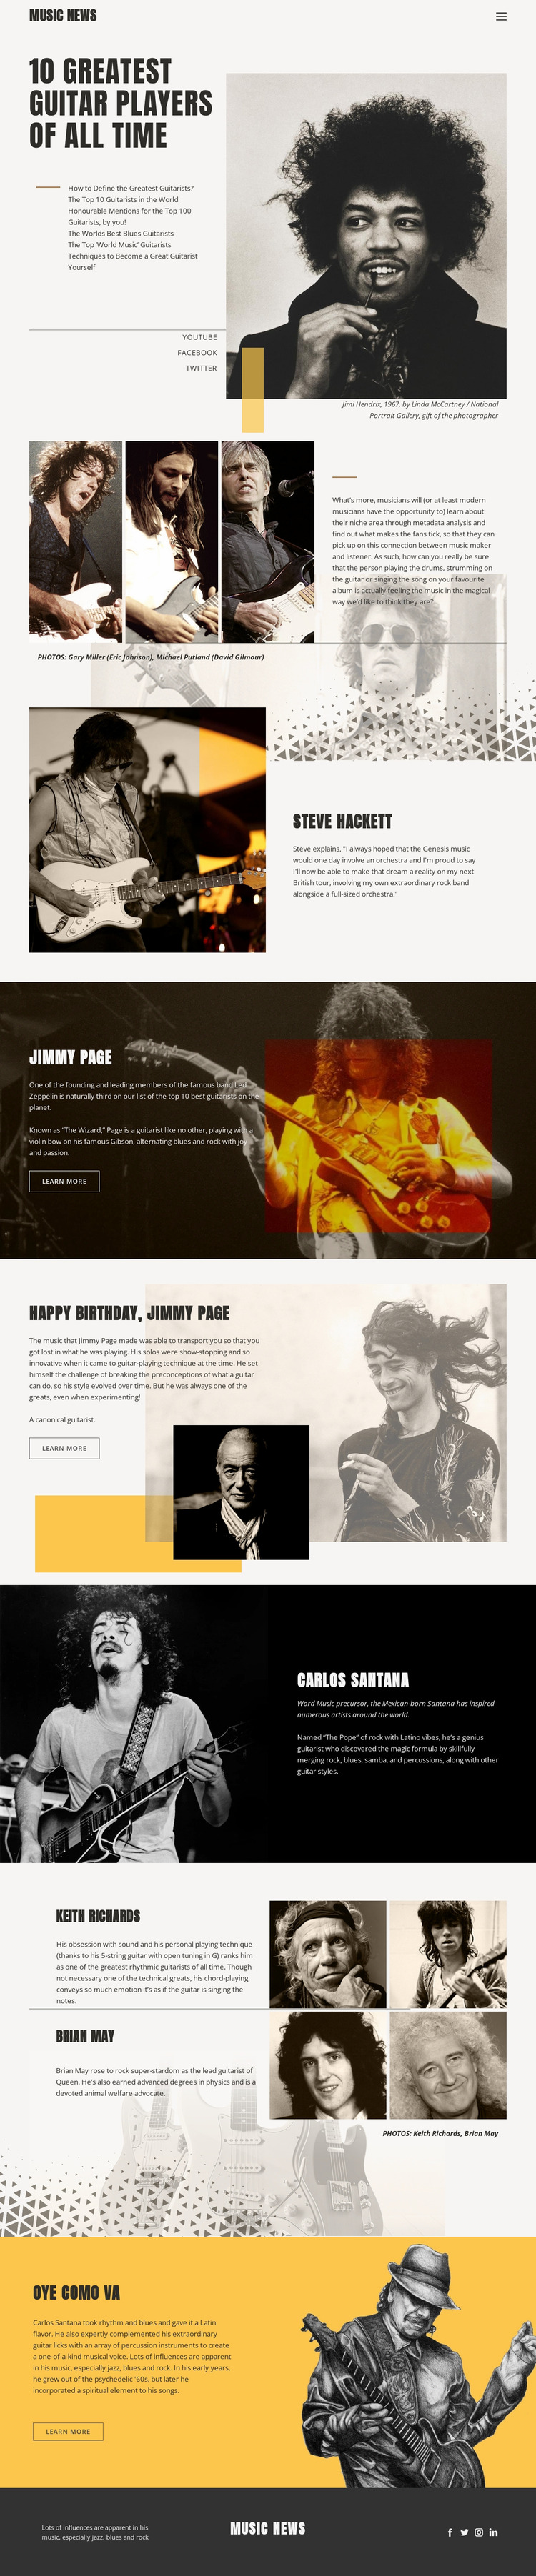 Download The Top Guitar Players Website Mockup